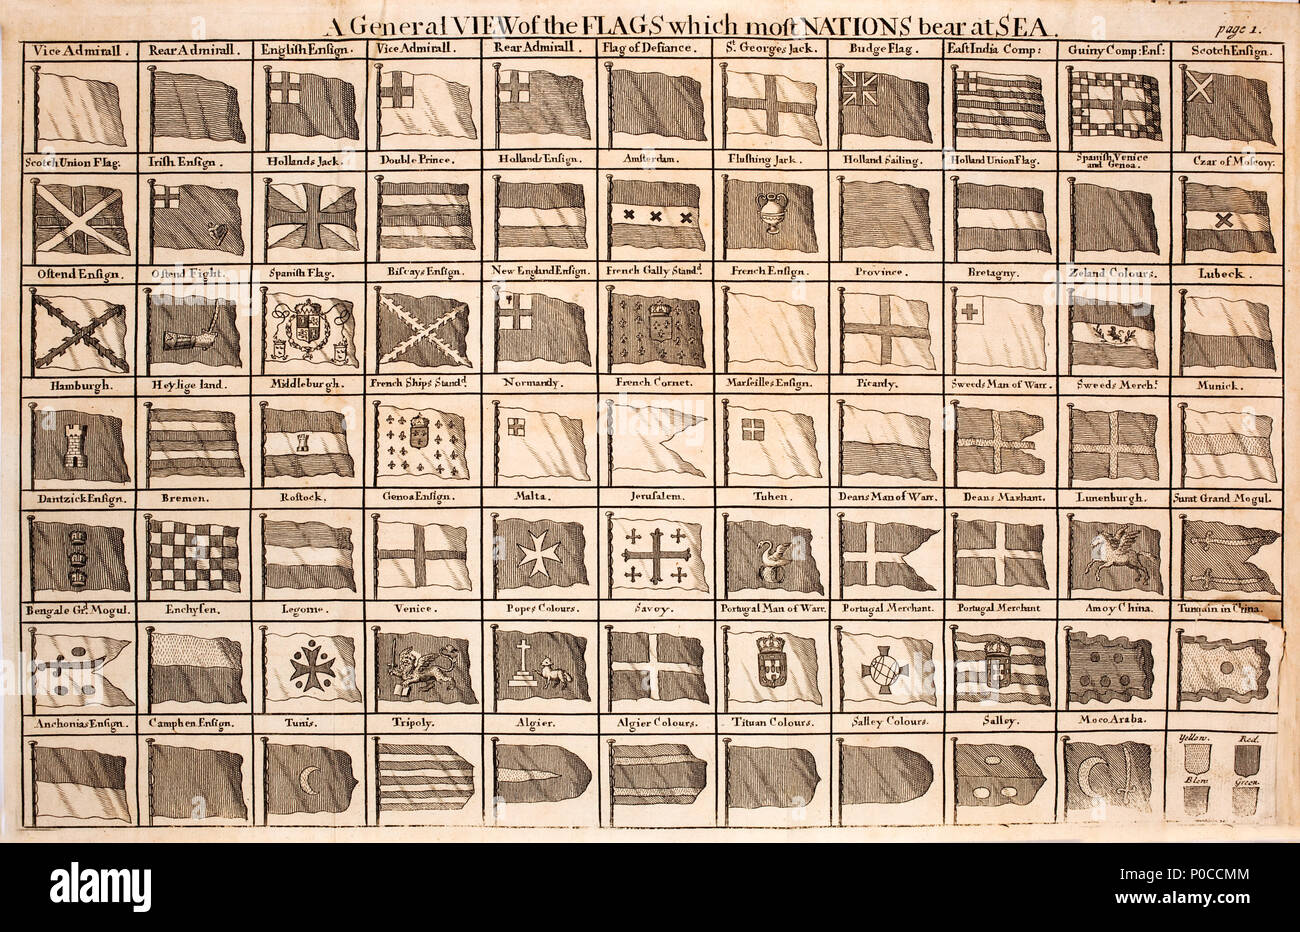 . English: 'A general view of the flags which most nations bear at sea'. 7 x 11 table of flags in black and white Nederlands: 77 nationale zeevlaggen van diverse landen. Zwart-wit.  . [1710]. Unknown 278 Alexander-Justice-Samuel-Pepys-Josiah-Burchett-A-general-treatise-of-the-dominion-of-the-sea MG 1105 Stock Photo